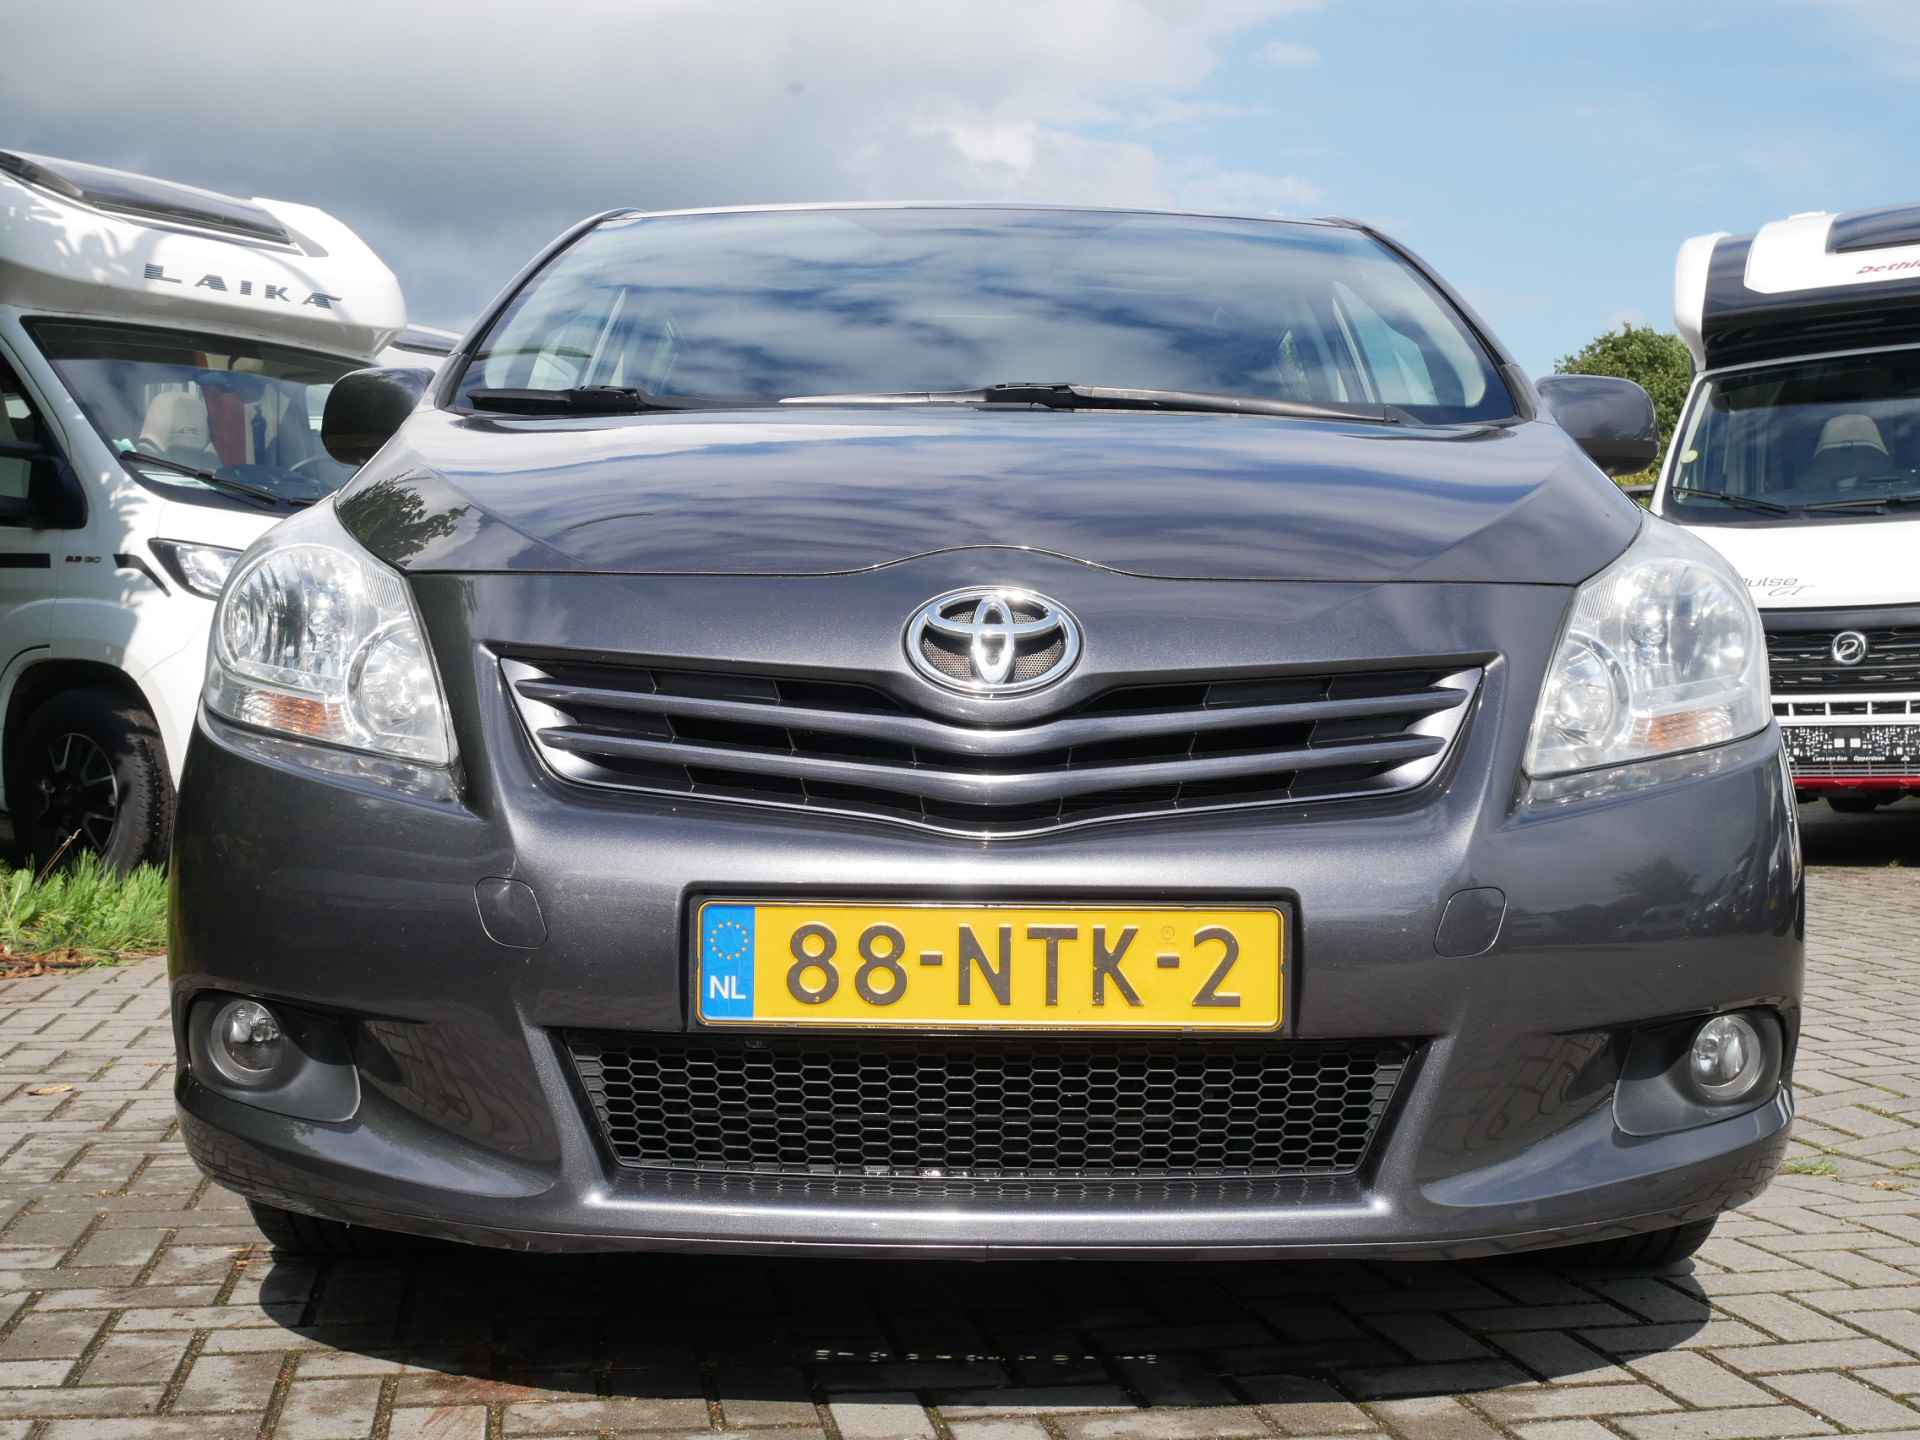 Toyota Verso 1.8 VVT-i Business Limited, Automaat, Zeer goede staat!!! - 3/26